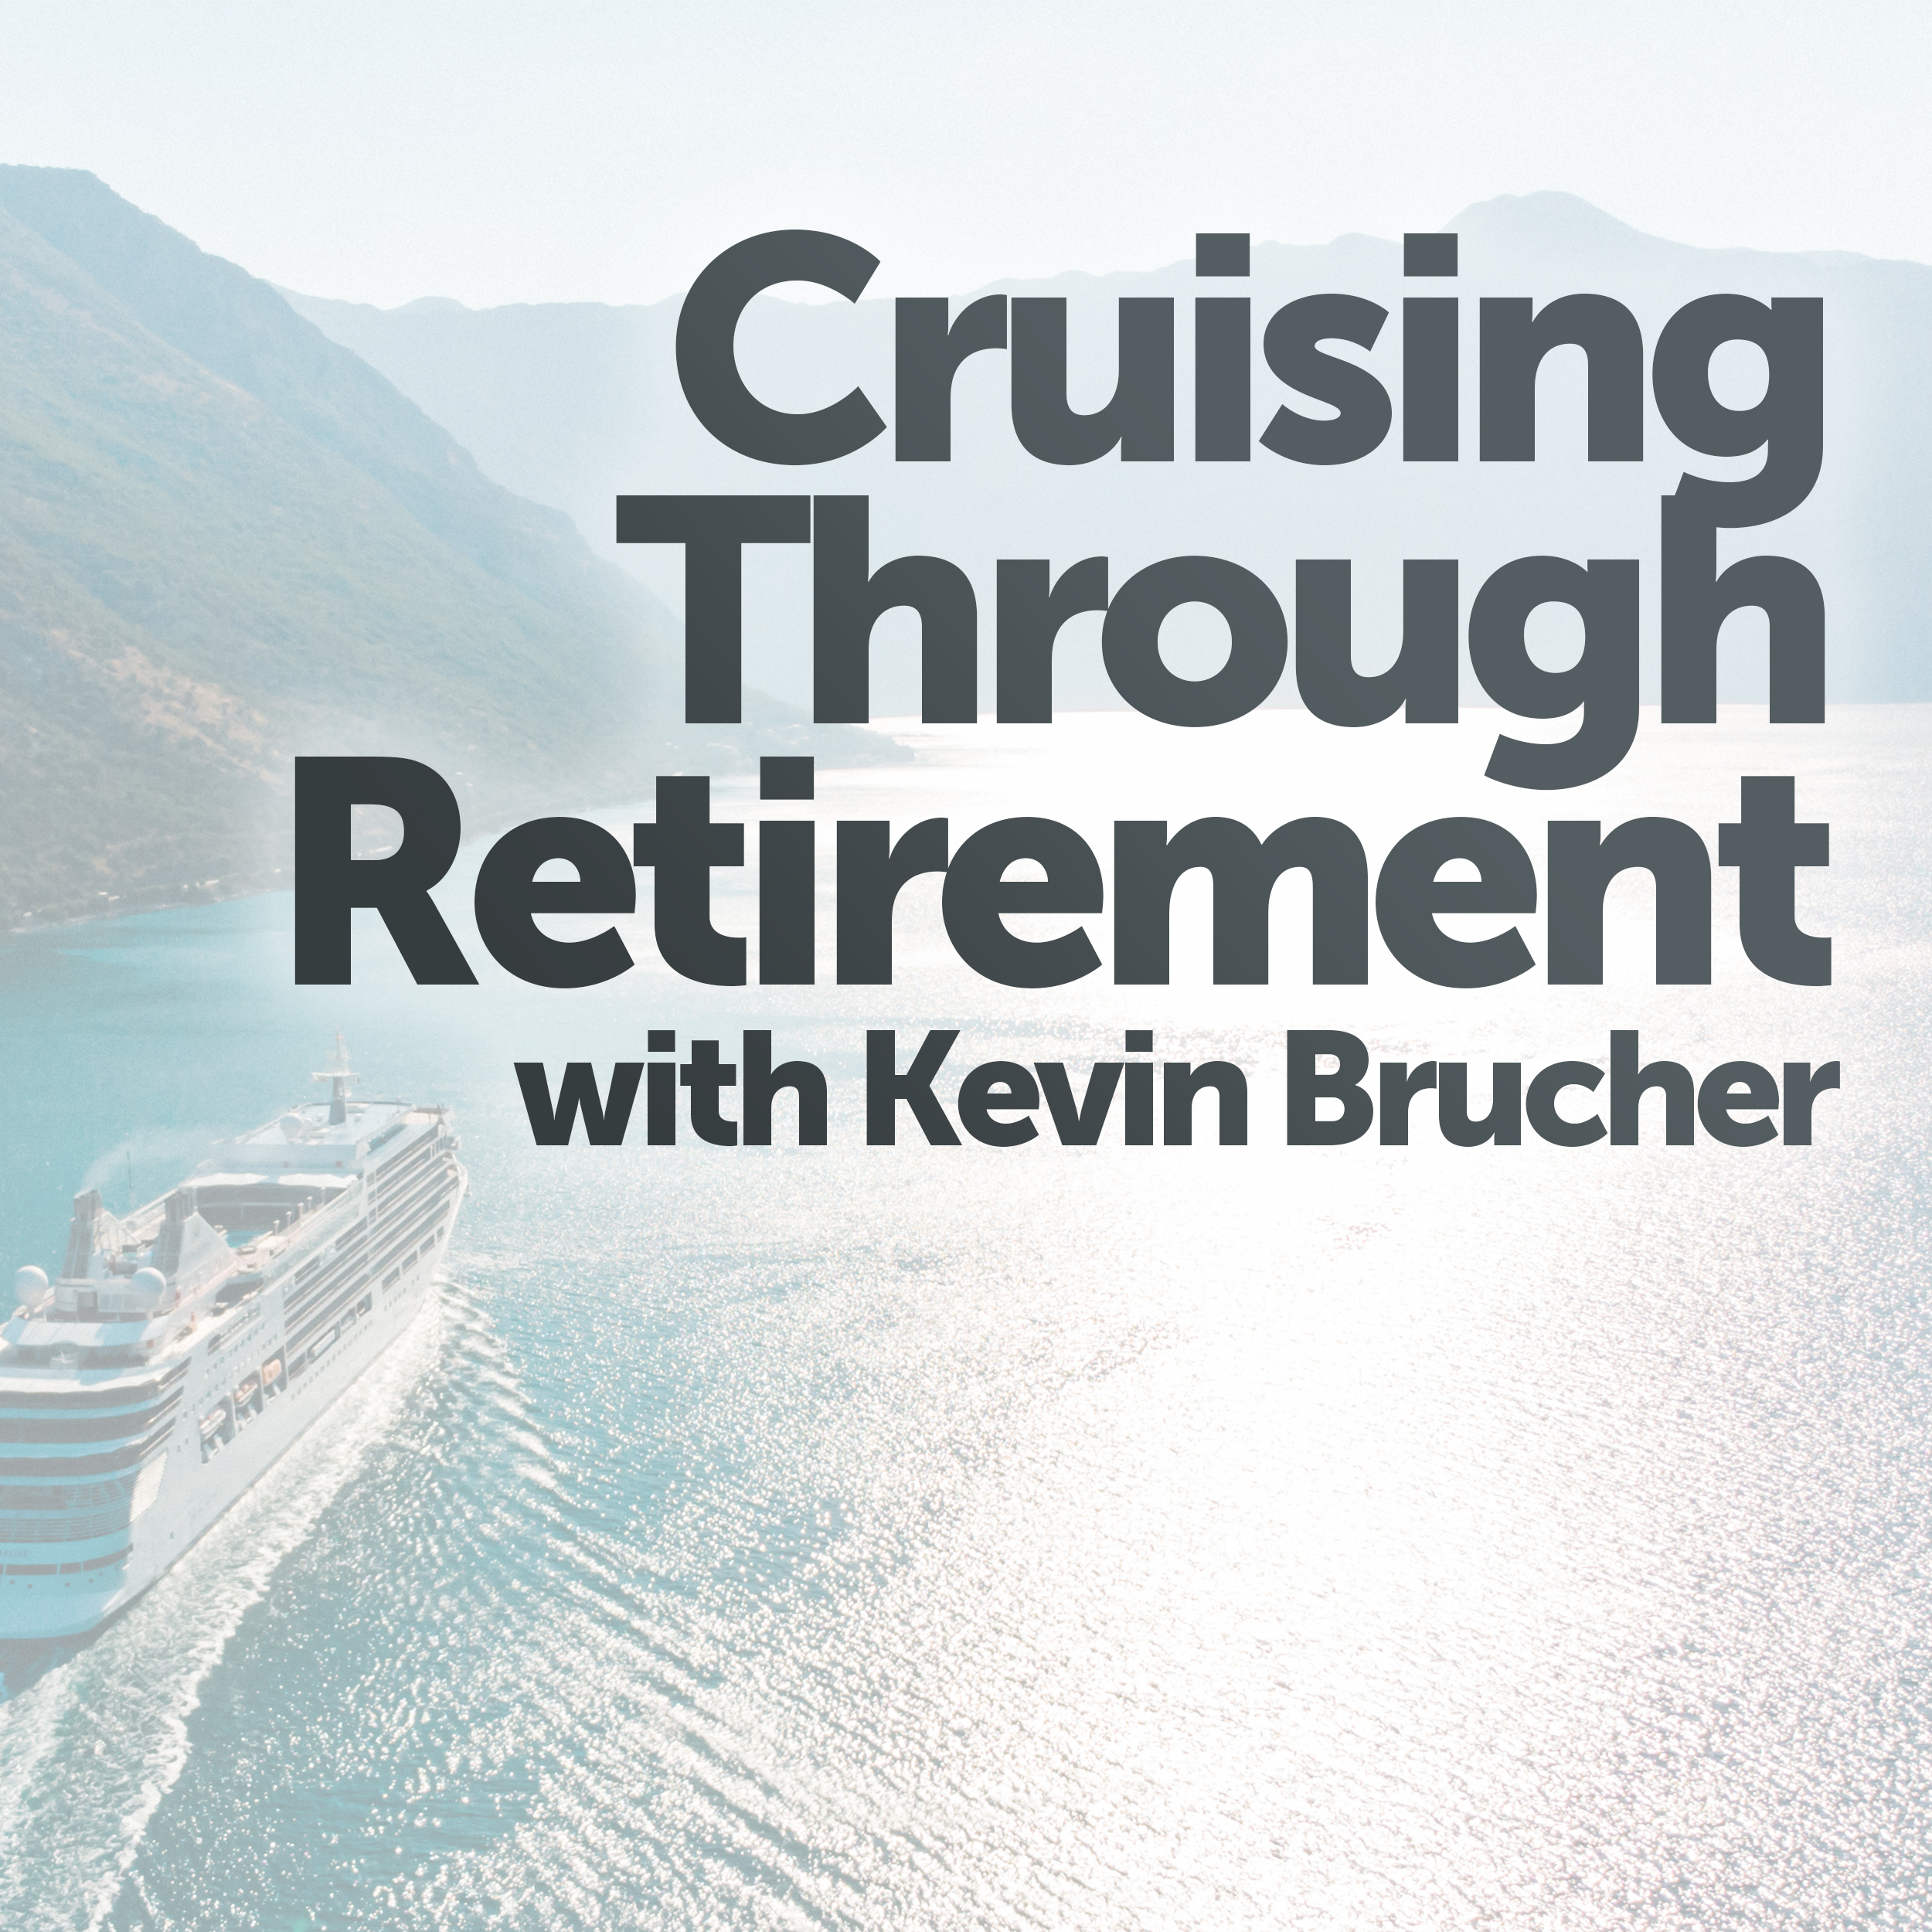 CruisingThrough Retirement  To help kickstart the process Kevin Brucher has put together steps to help you get started.